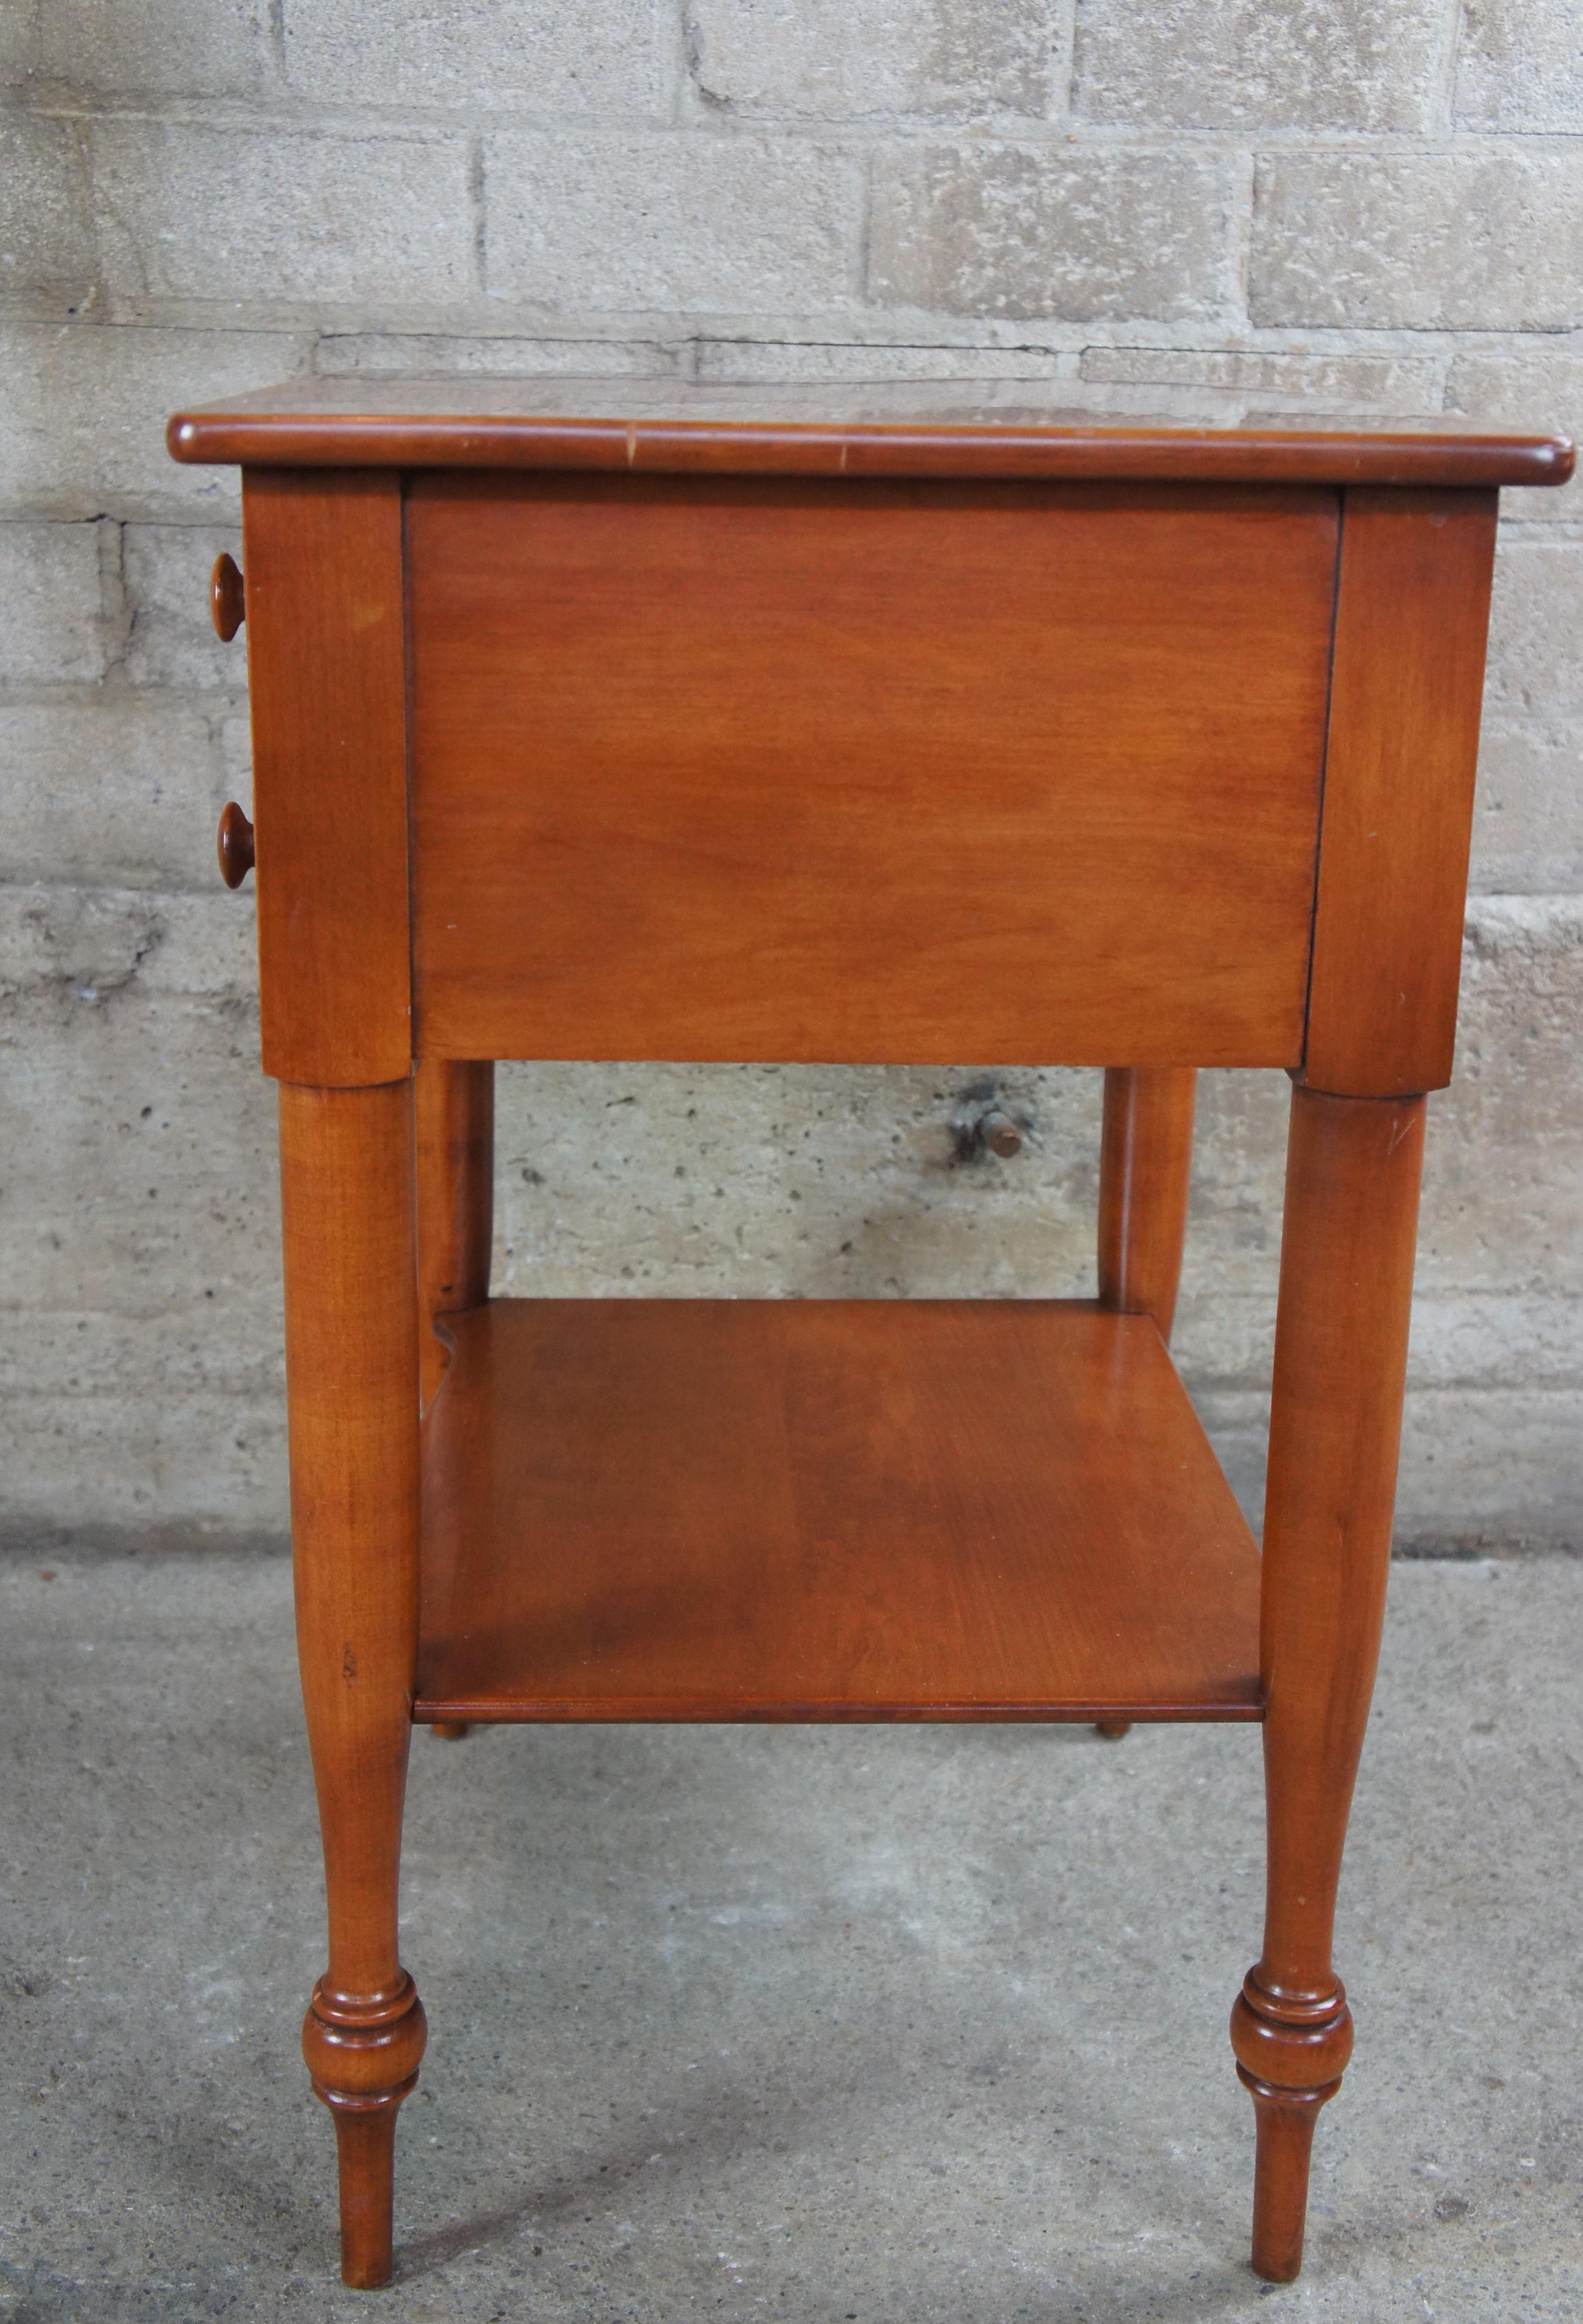 Mid-20th Century Vintage Willett Maple Nightstand 2-Drawer Early American Country Side Table